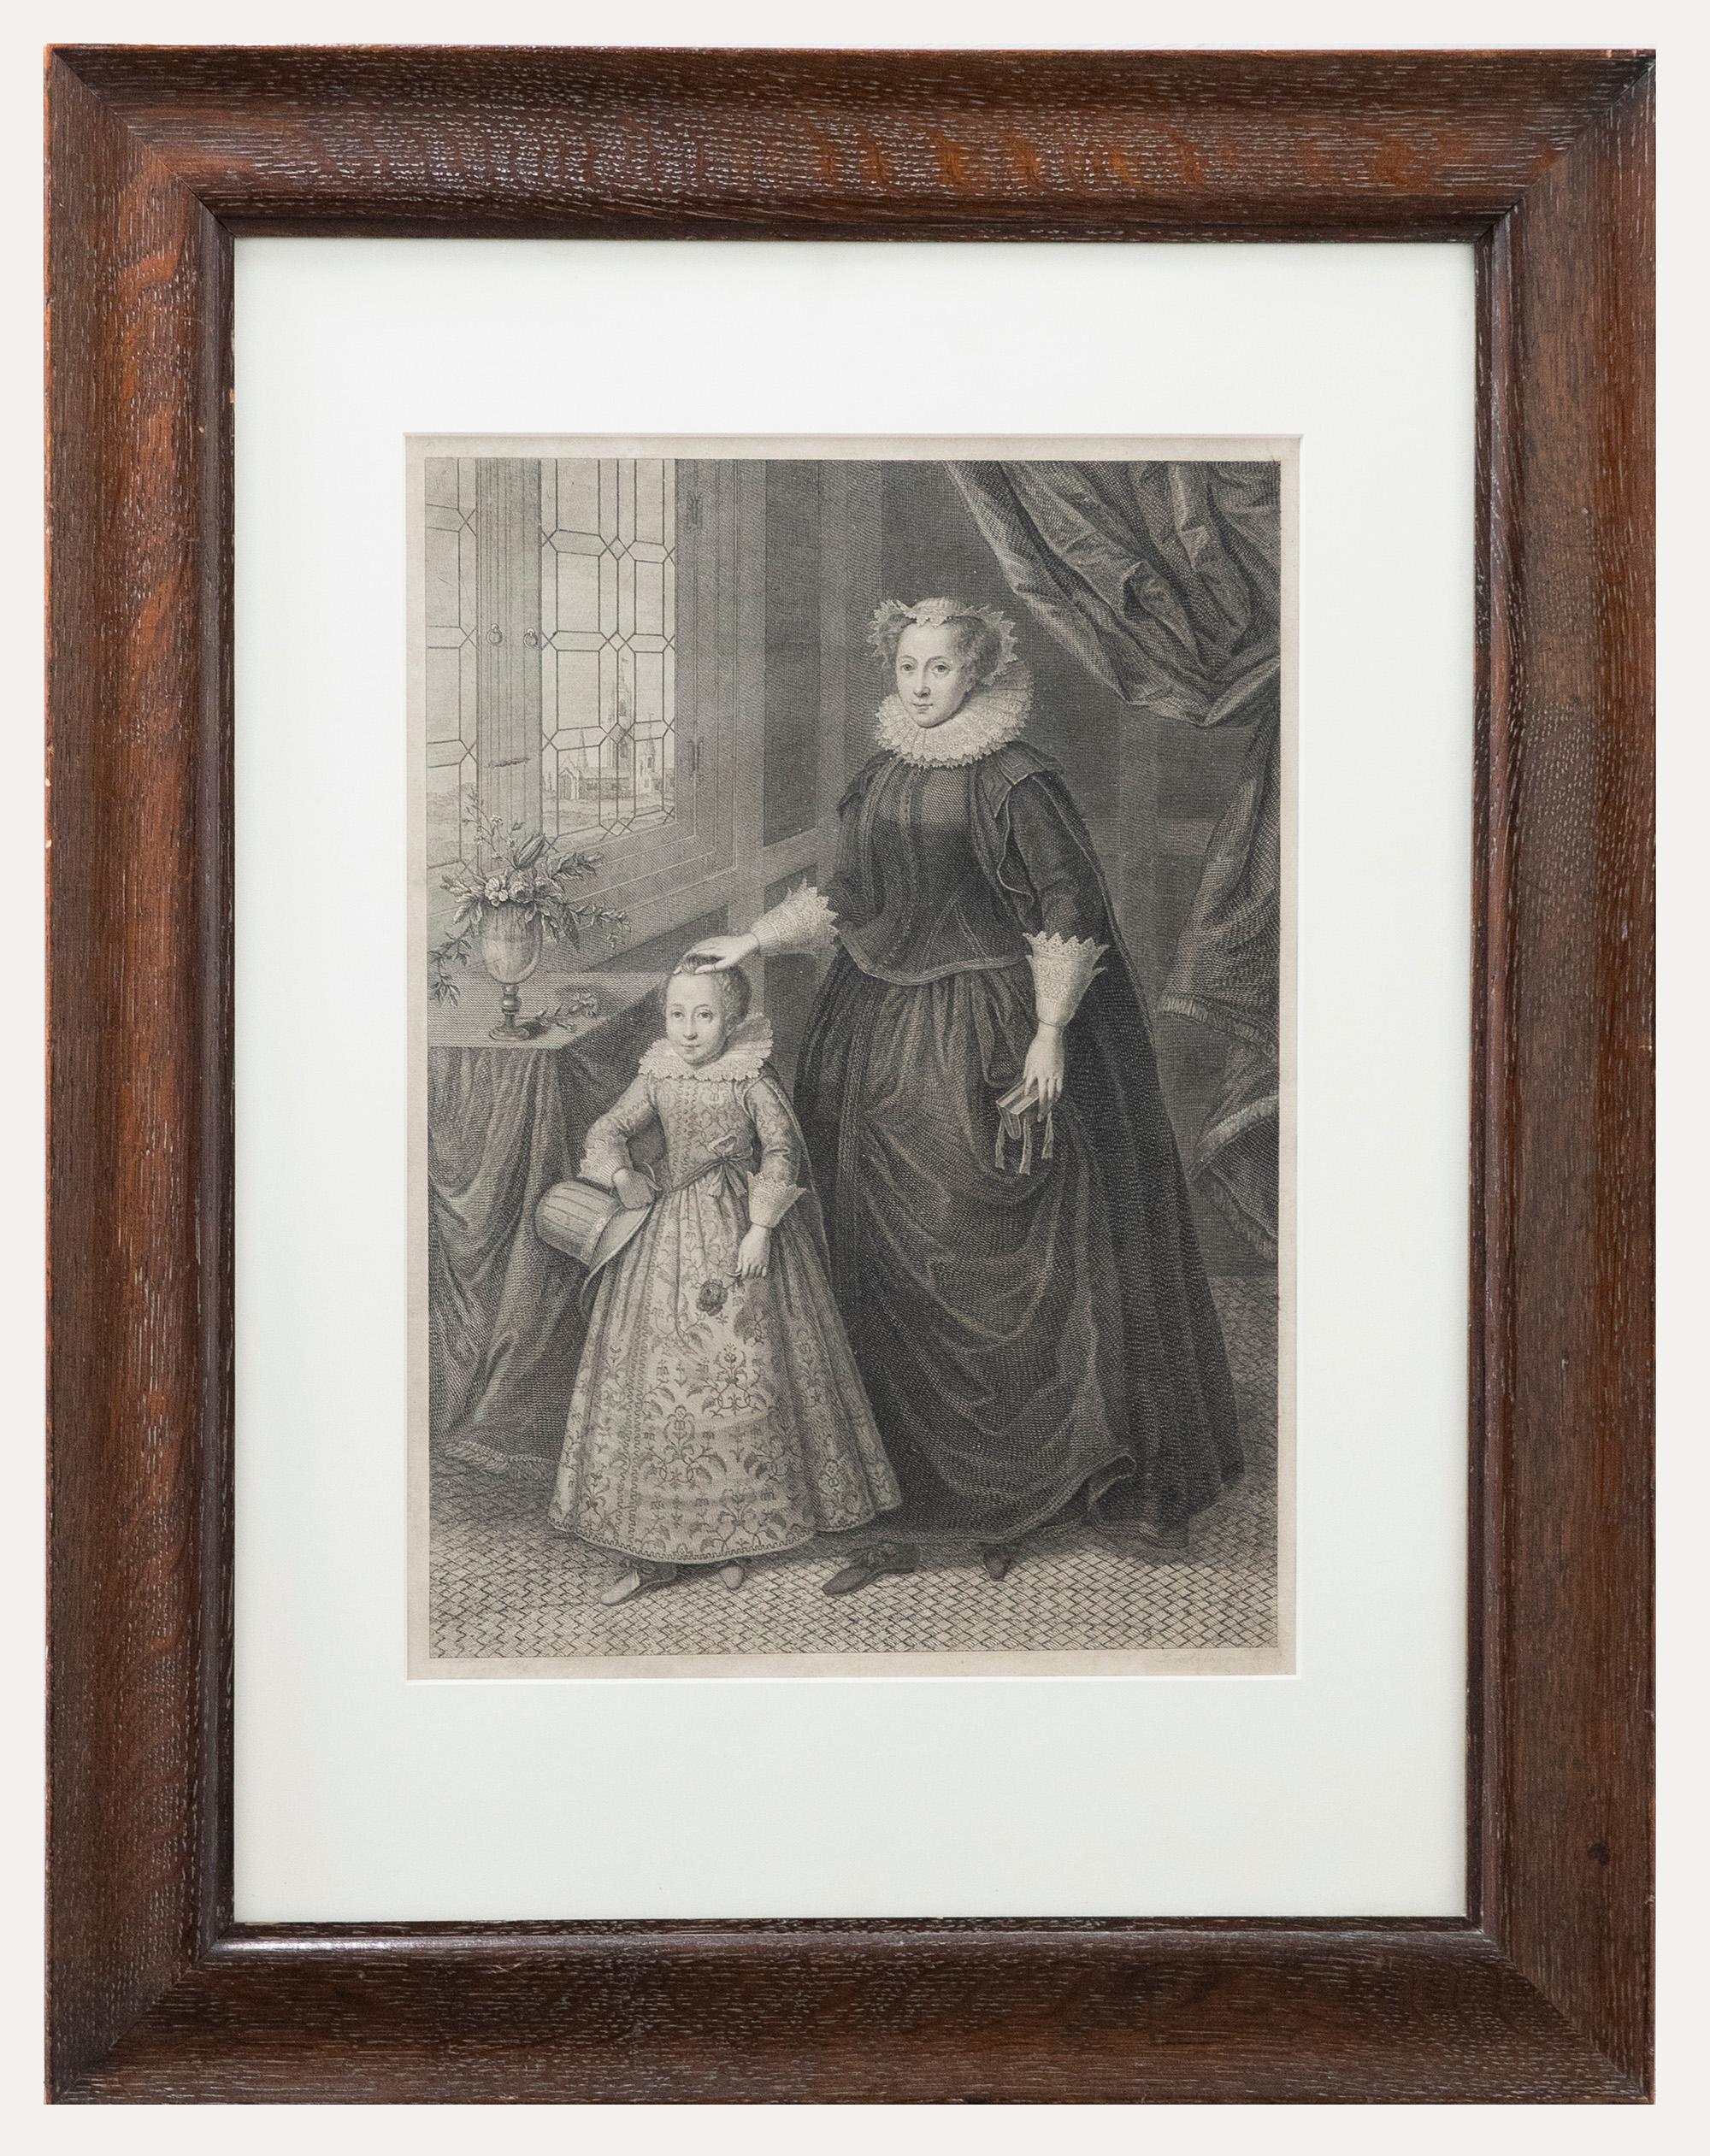 A delightful 19th century engraving after Frederico Zuccari (c.1543-1609) by engraver Francesco Bartolozzi. The scene depicts Mary Queen of Scots and her son James I and VI. Signed in graphite to the lower right. Presented in an oak frame. On paper. 